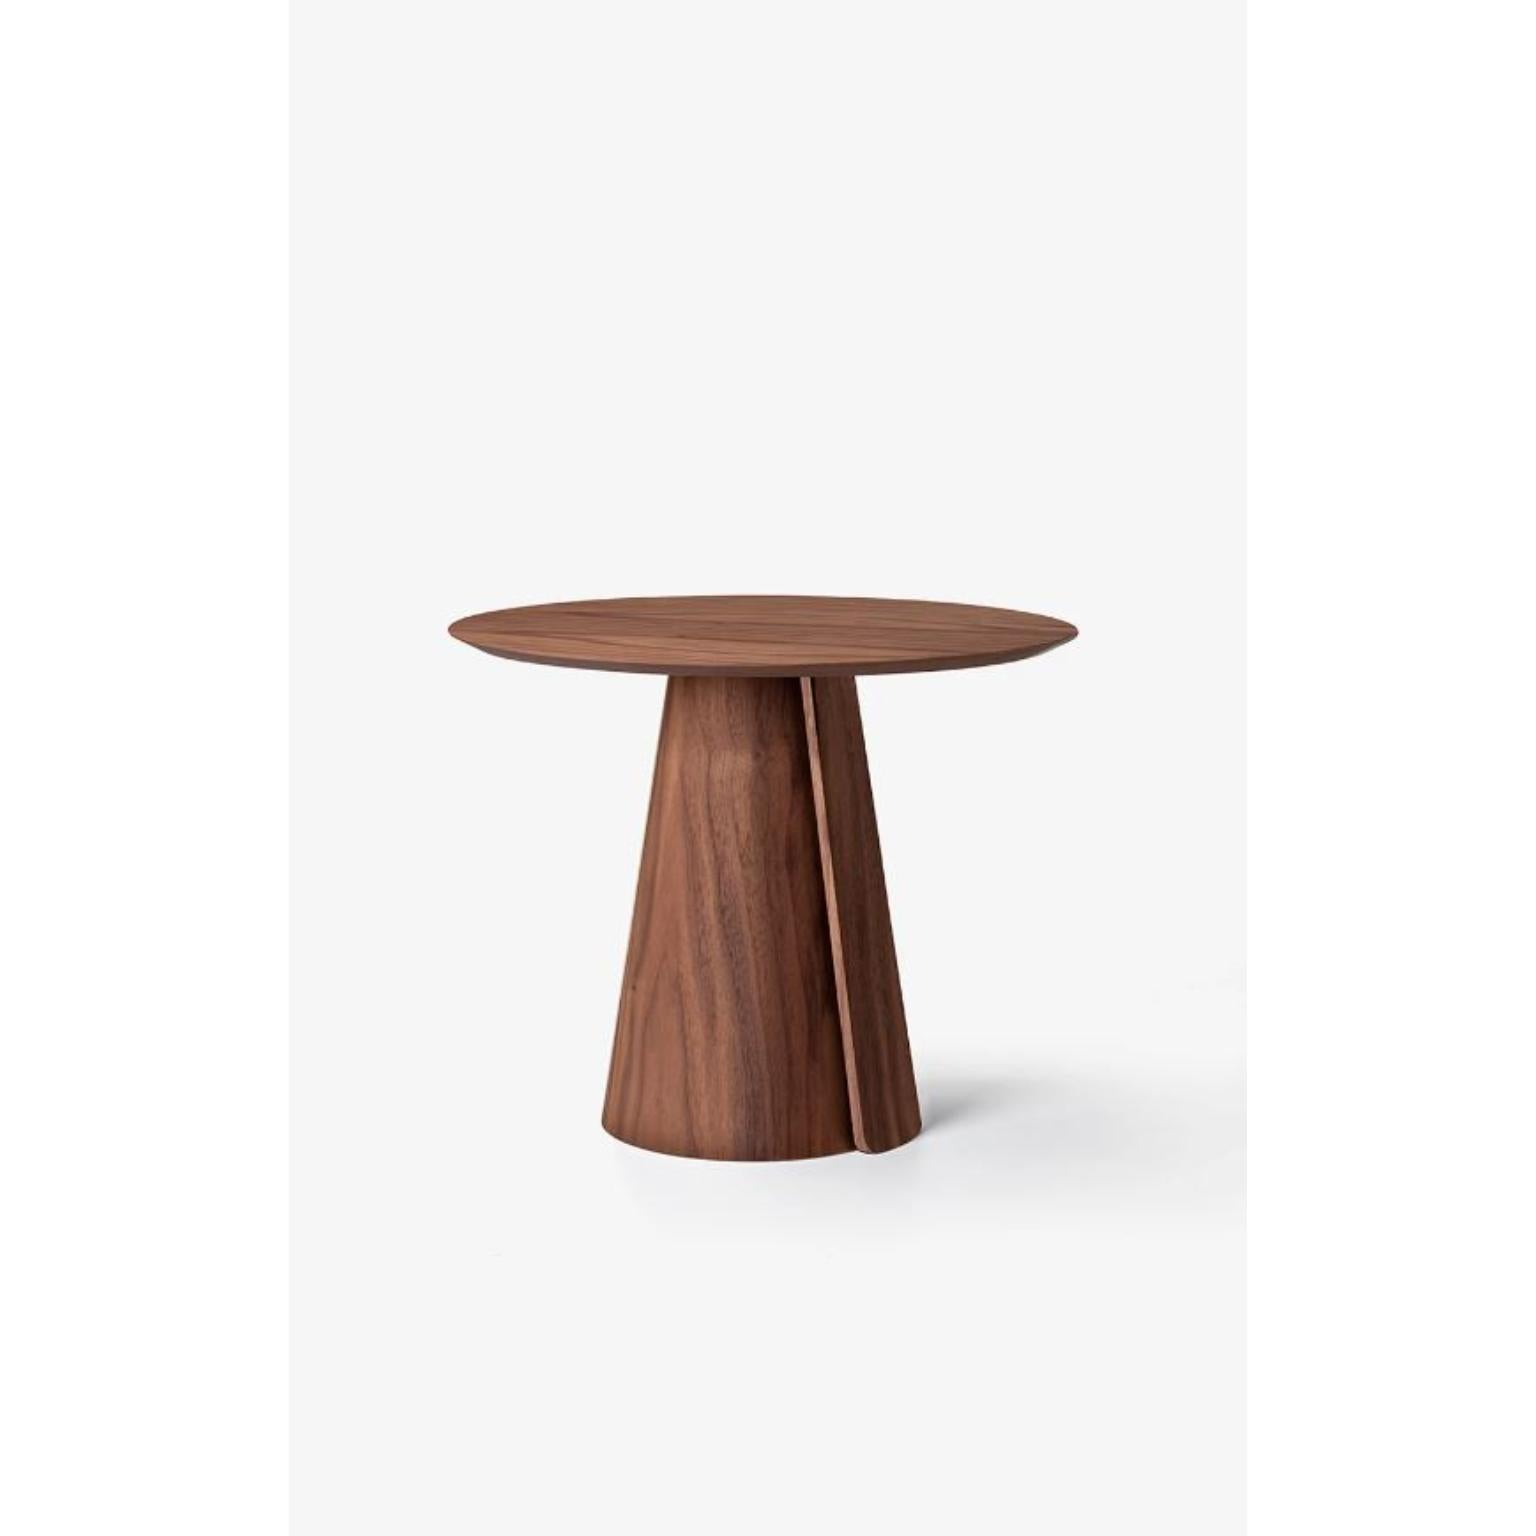 Volta Dining Table 160 by Wentz
Dimensions: D 160 x W 160 x H 75 cm
Materials: Wood, Plywood, MDF, Natural Wood Veneer, Steel.
Weight: 125kg / 276 lbs

The Volta table references nature in its impermanence. The detail on the base suggests natural